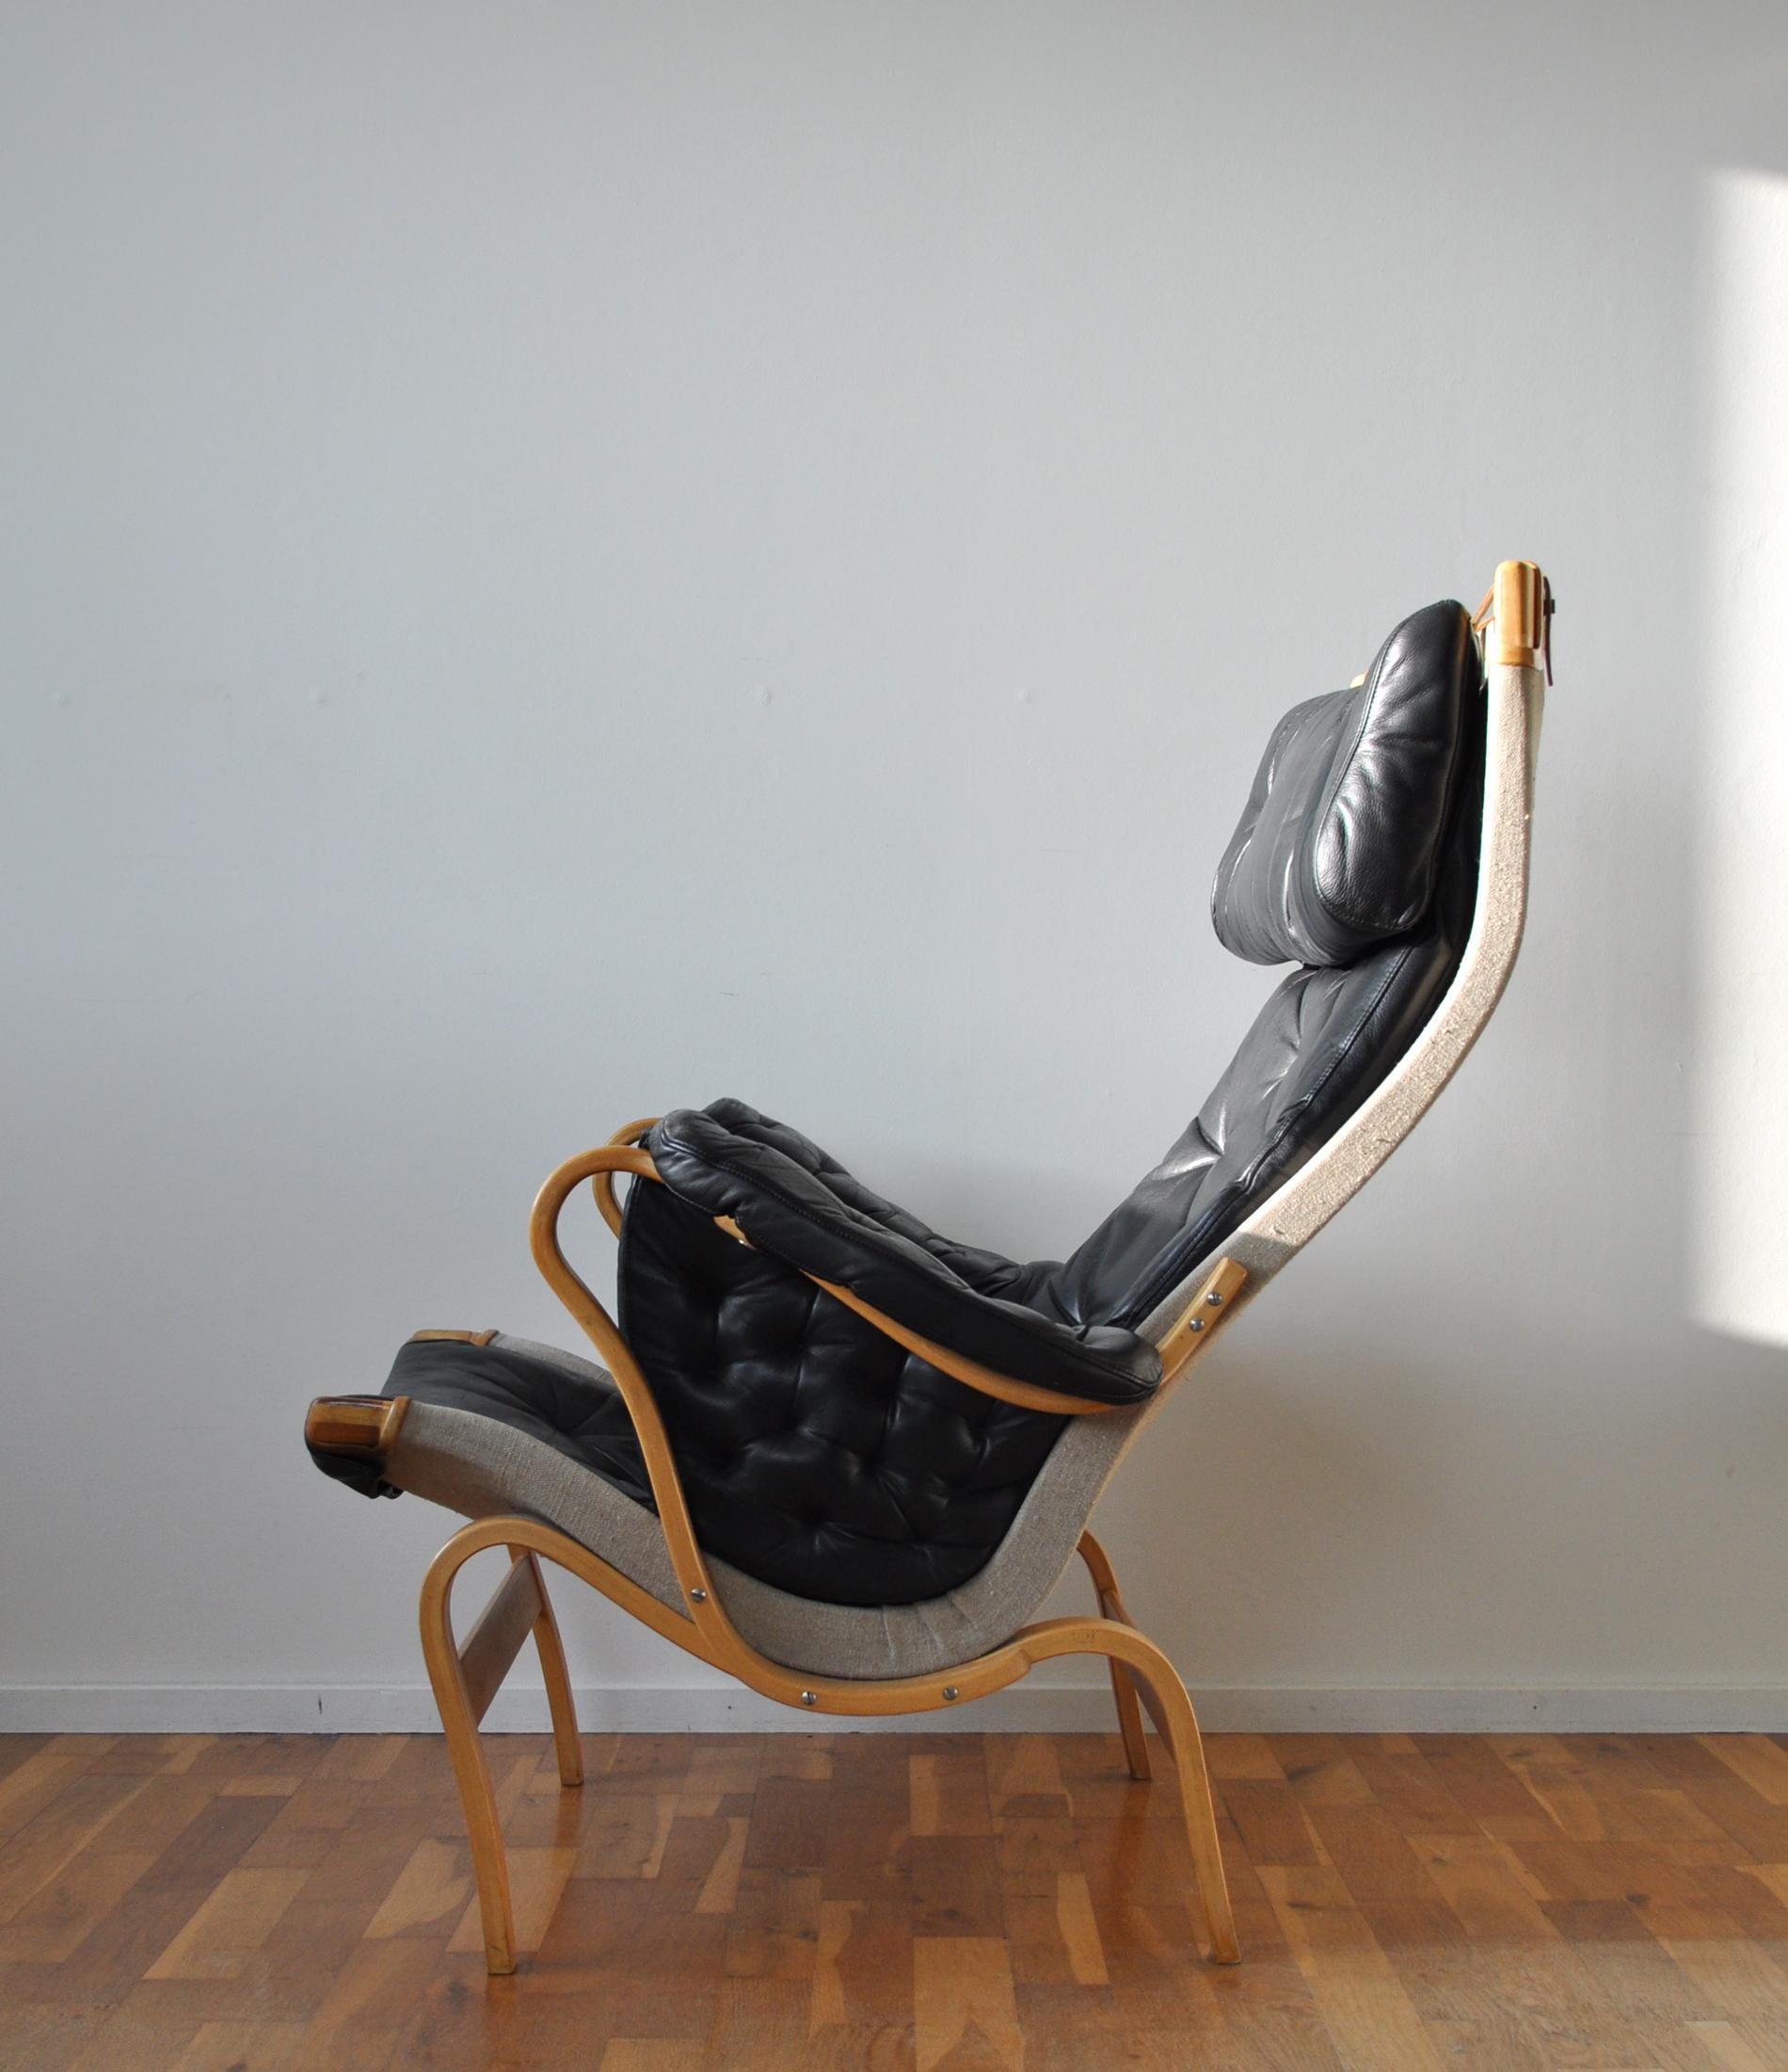 Comfortable Pernilla armchair designed by Bruno Mathsson. The first version was designed in 1944. This is an improved version designed for DUX in 1969. It comes with frame of moulded beech stretched with canvas and black leather in a good vintage